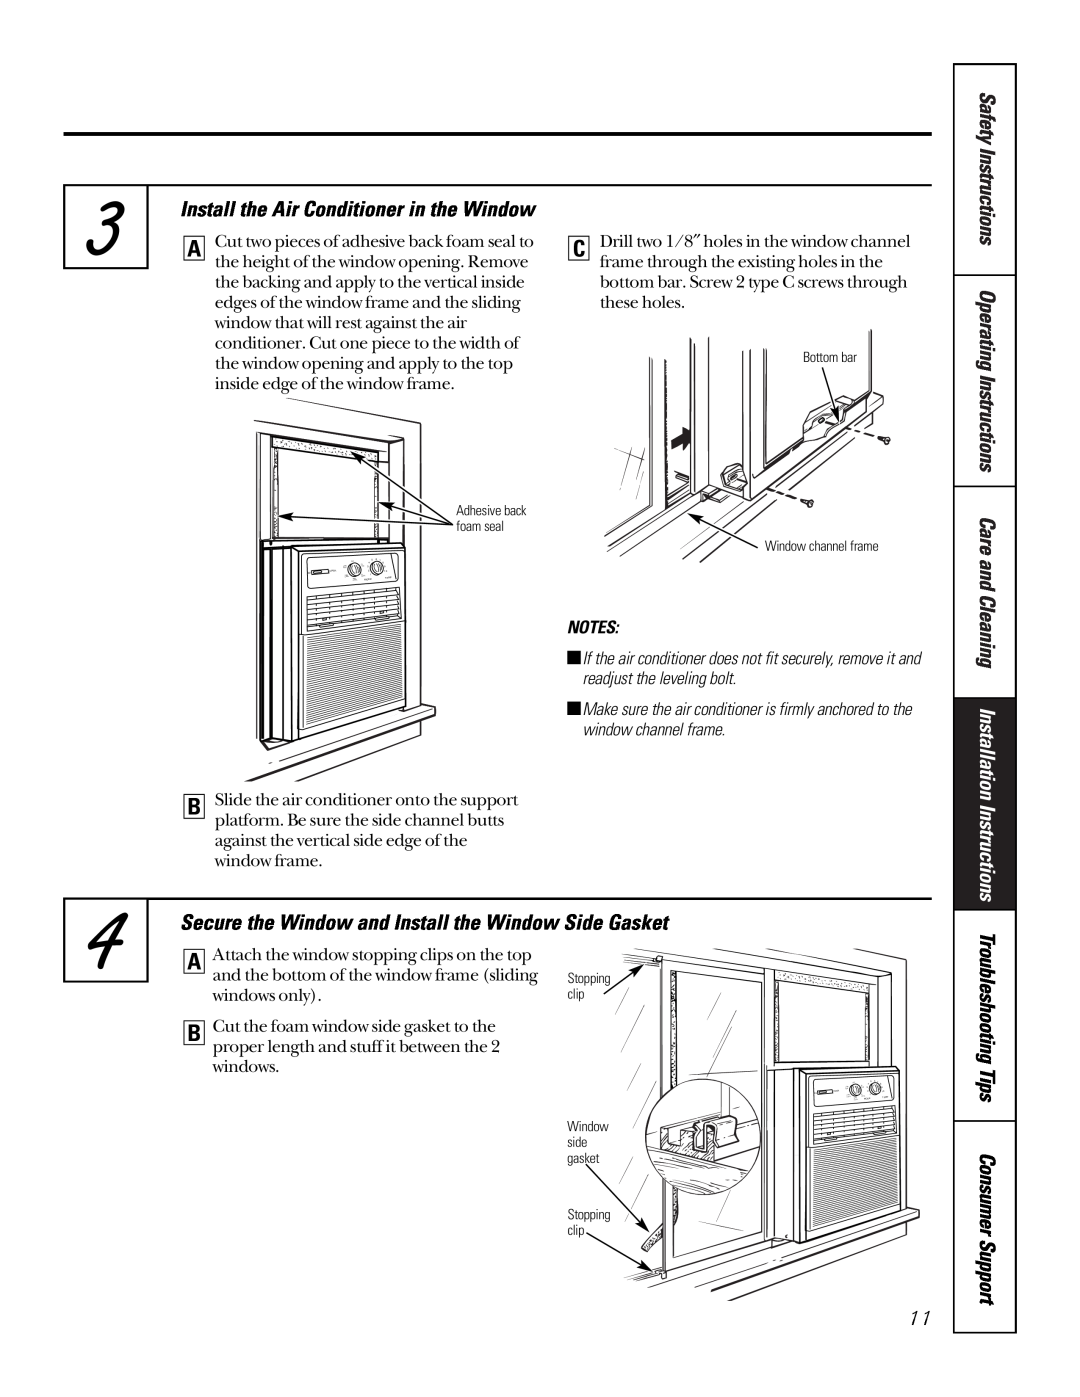 GE AVX08, AVX10, AVX07 Troubleshooting Tips Consumer Support, Install the Air Conditioner in the Window 